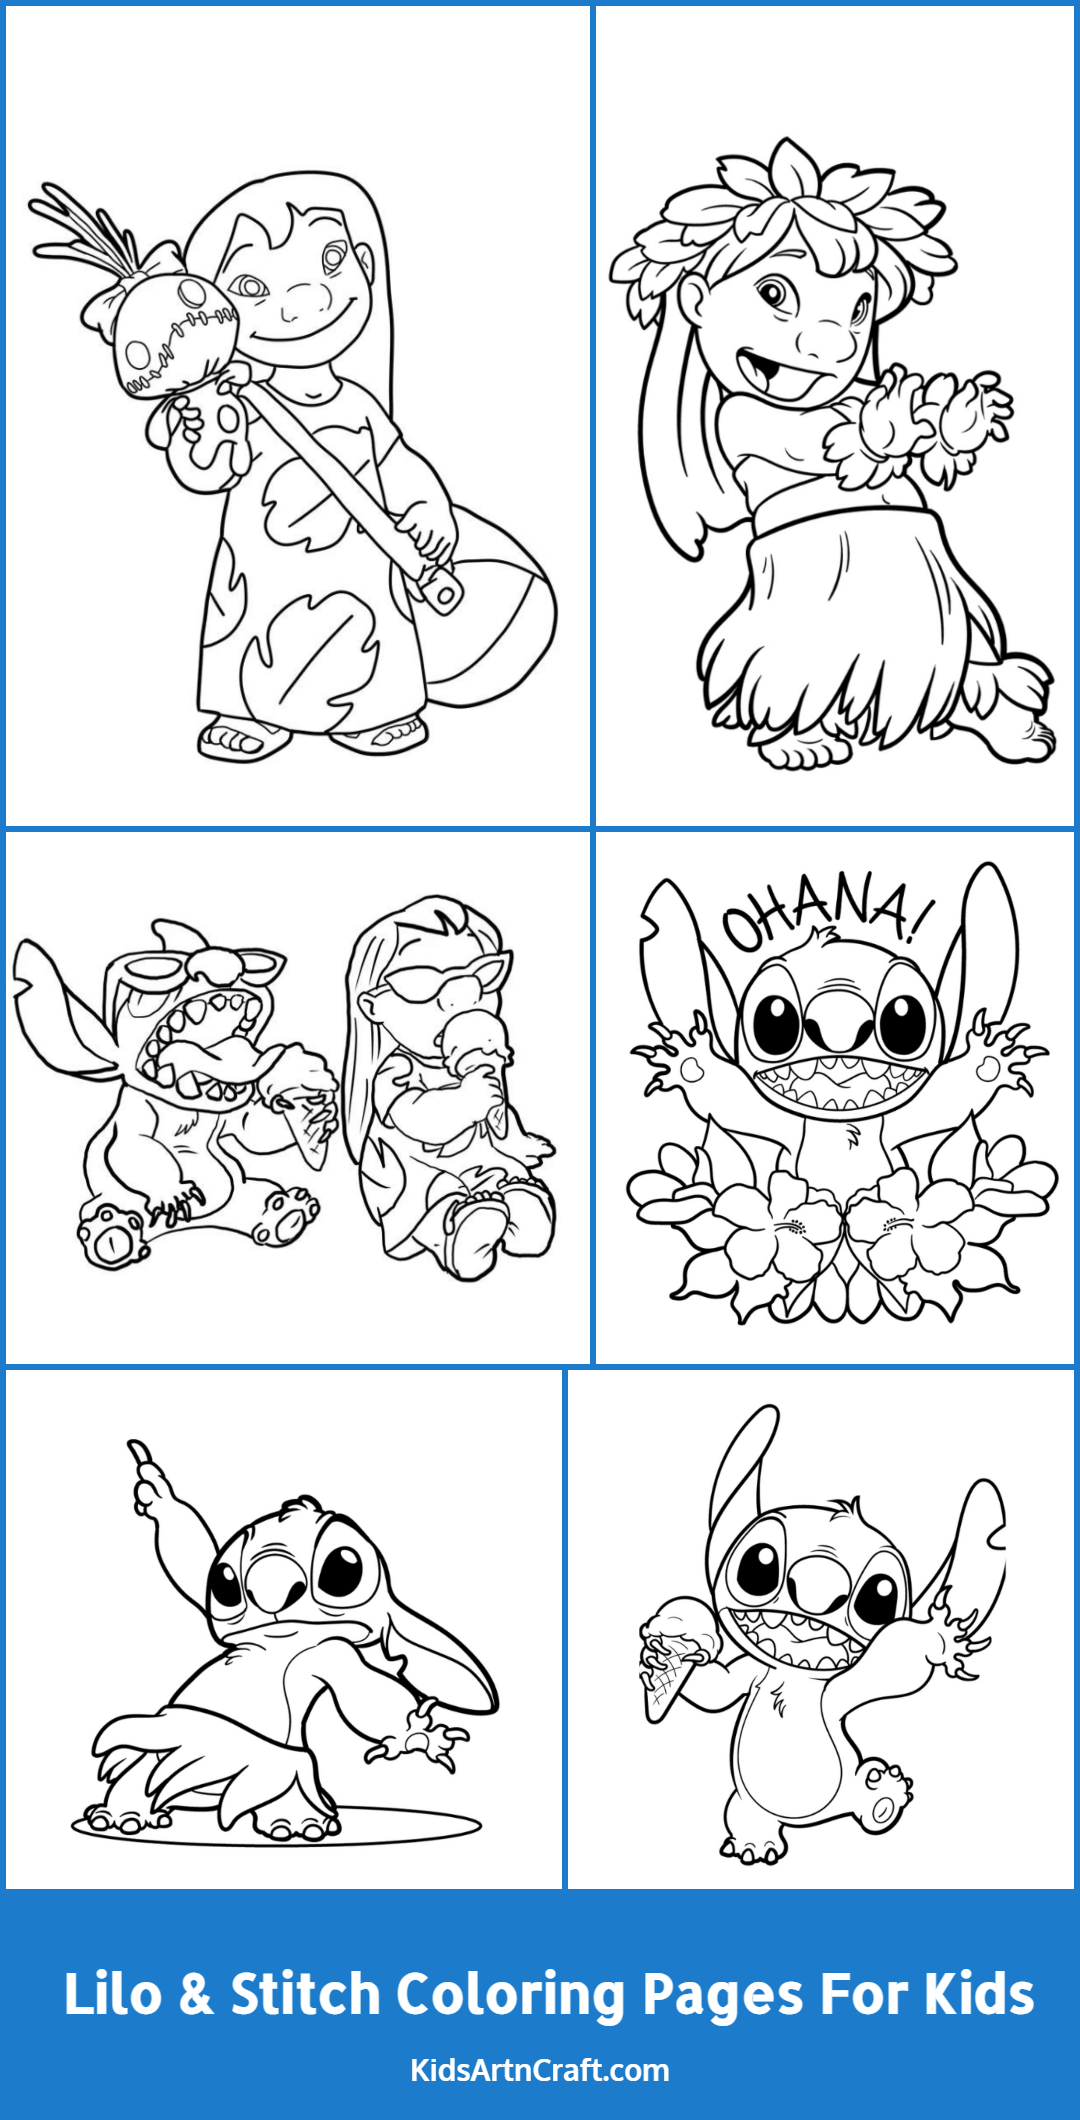 Lilo & Stitch Coloring Pages For Kids – Free Printables   Kids Art ...